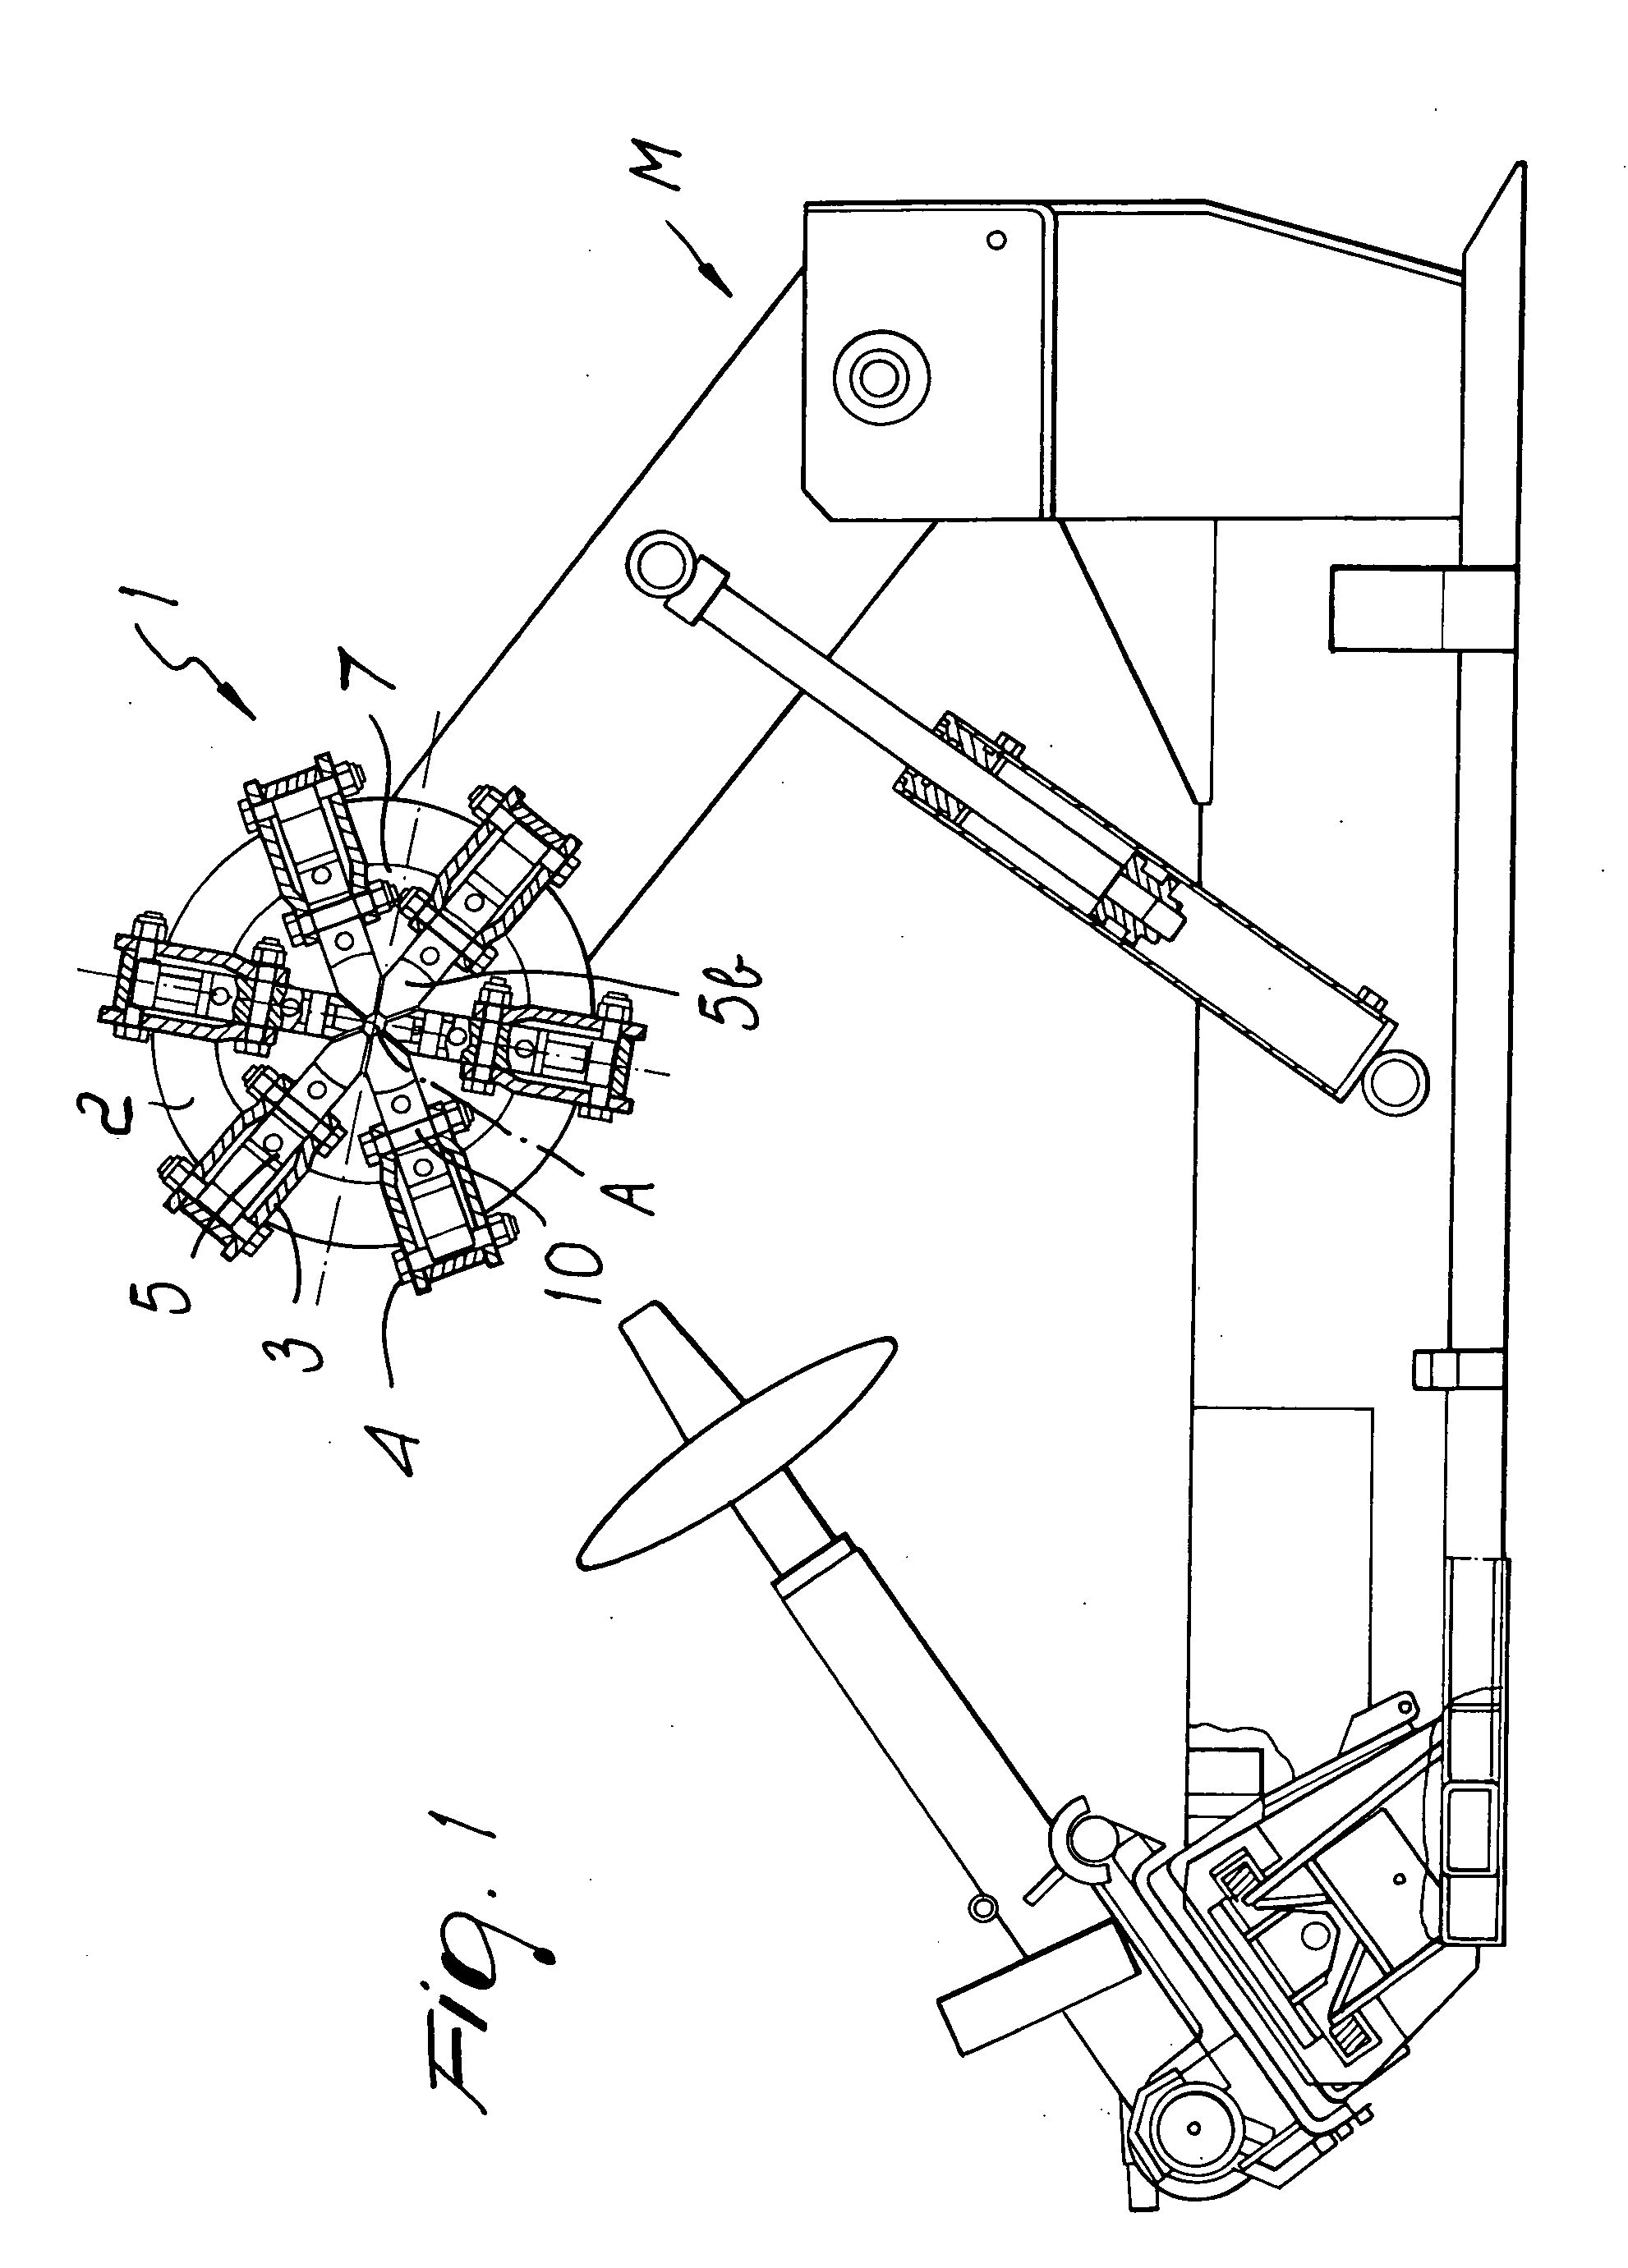 Spindle for fastening rims of vehicle wheels on repair shop machines